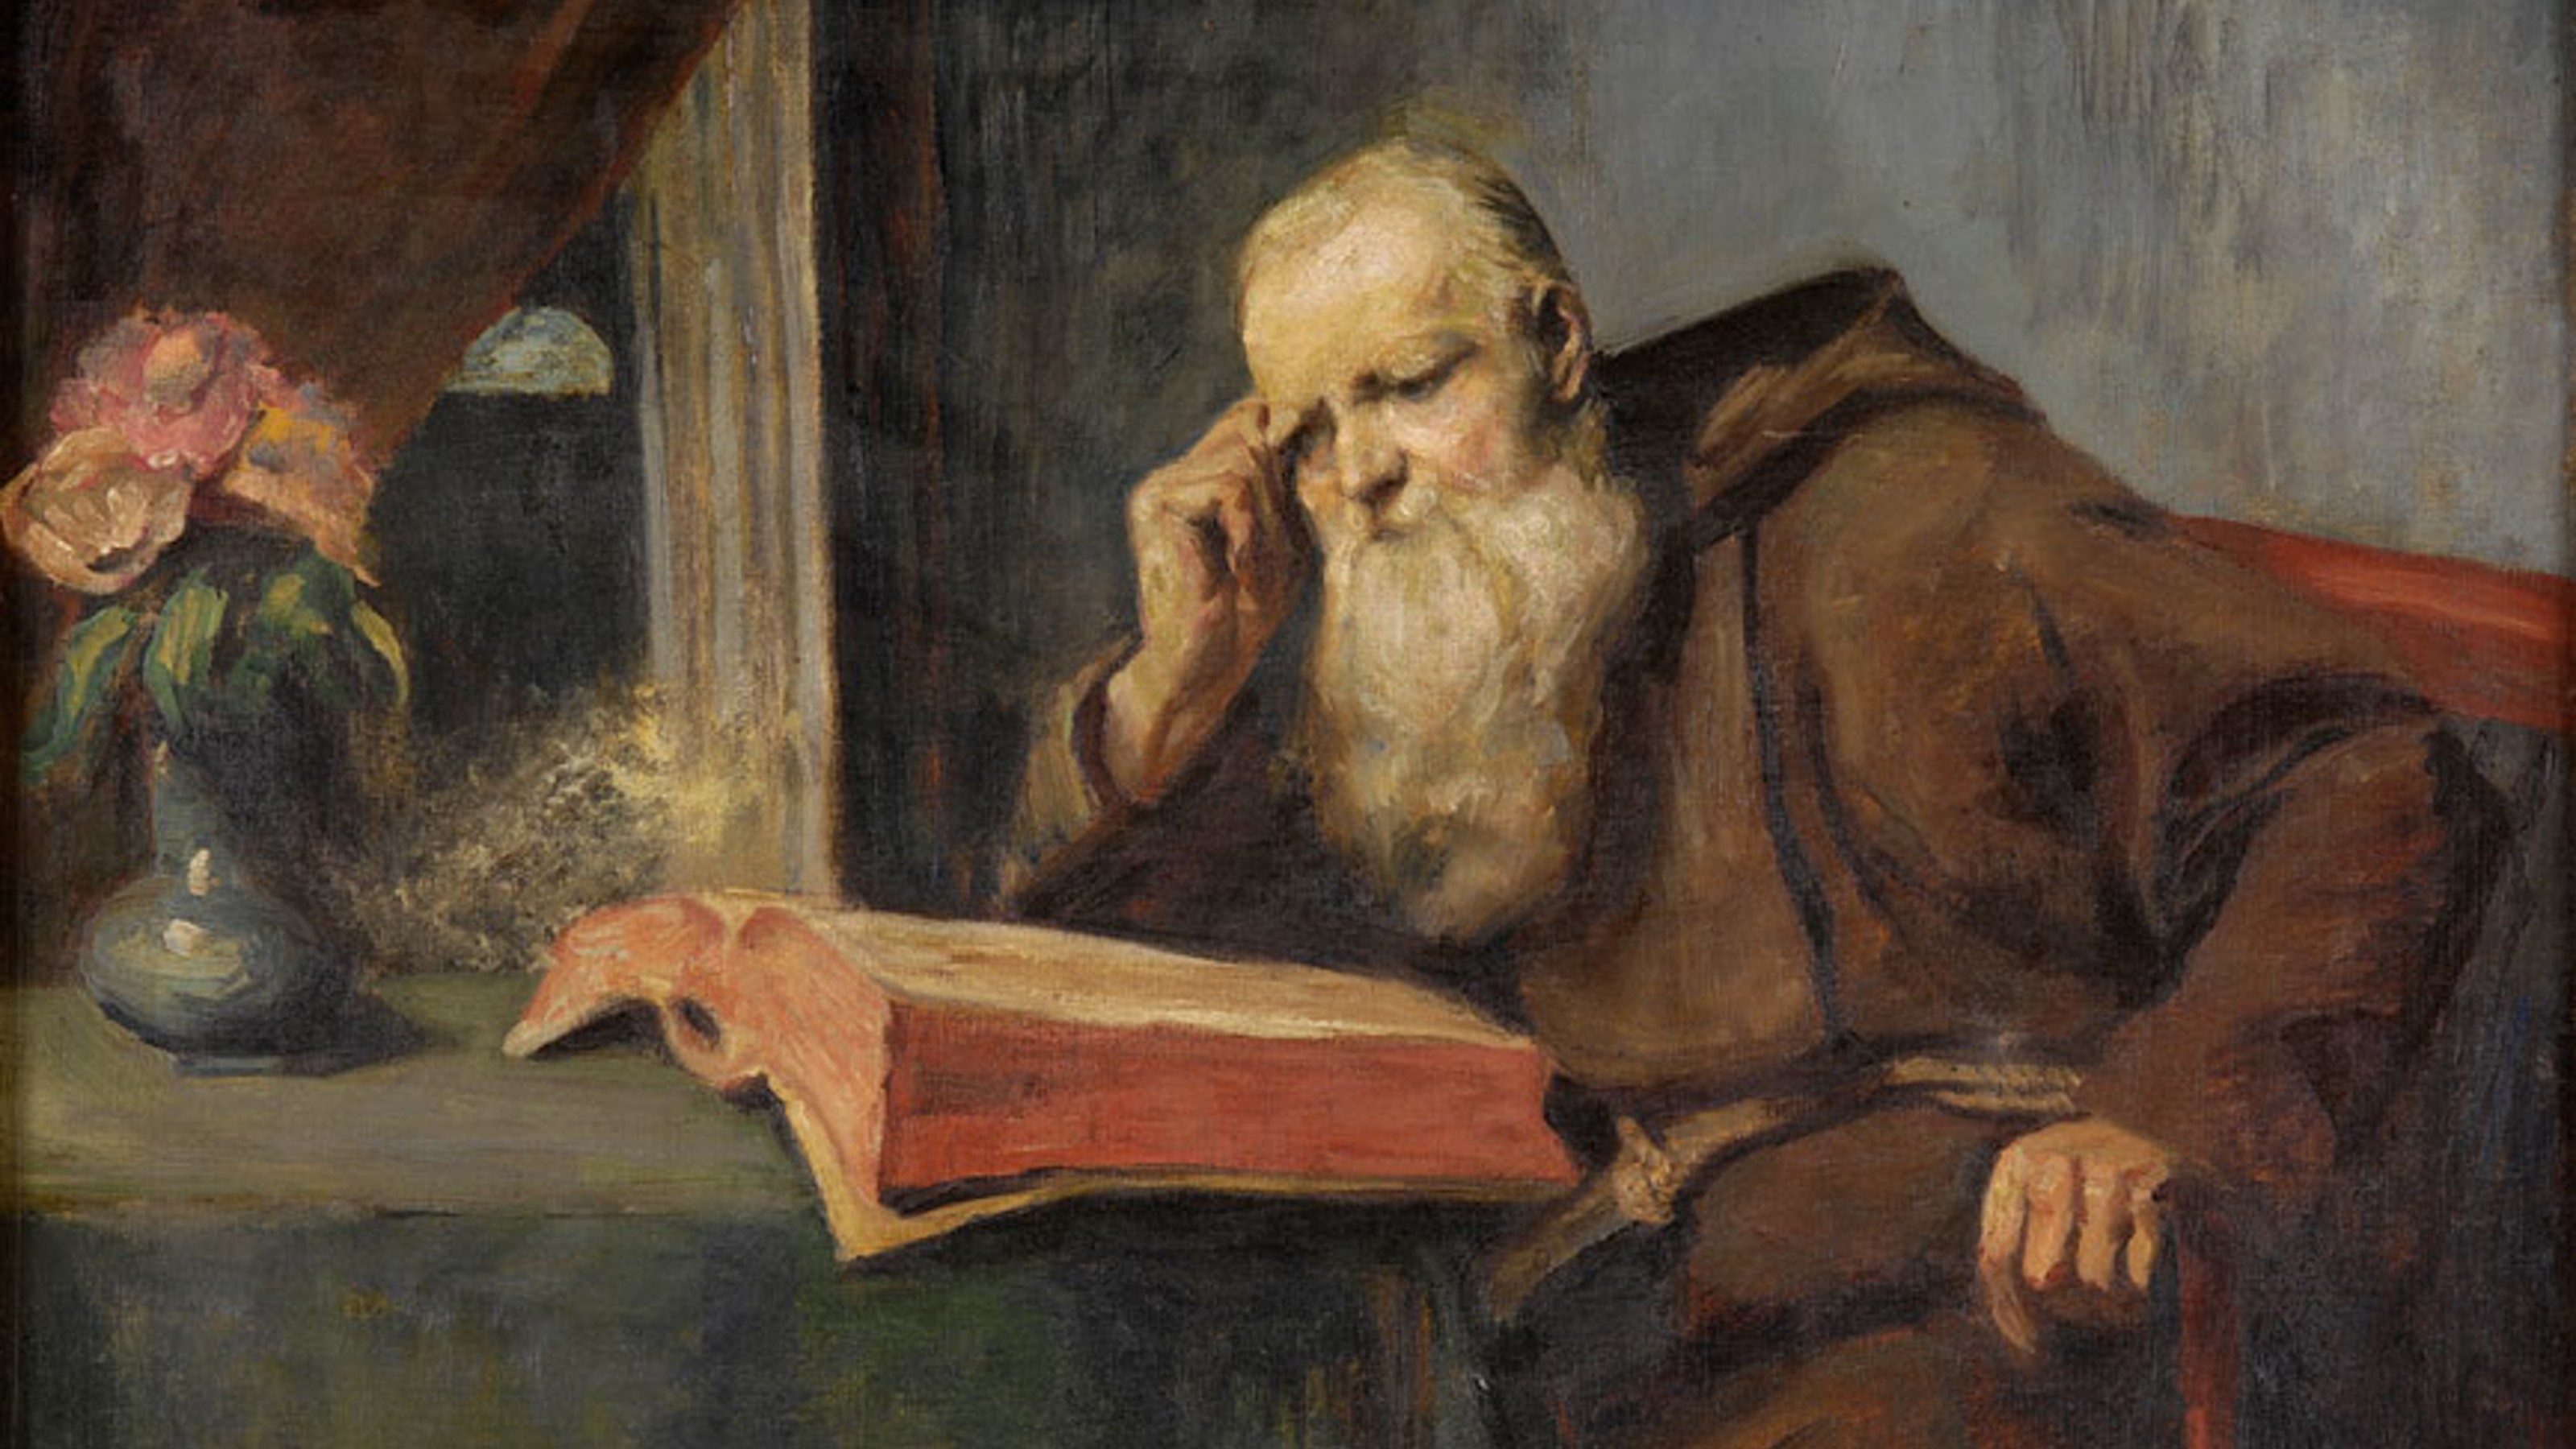 A painting of a monk reading a book.